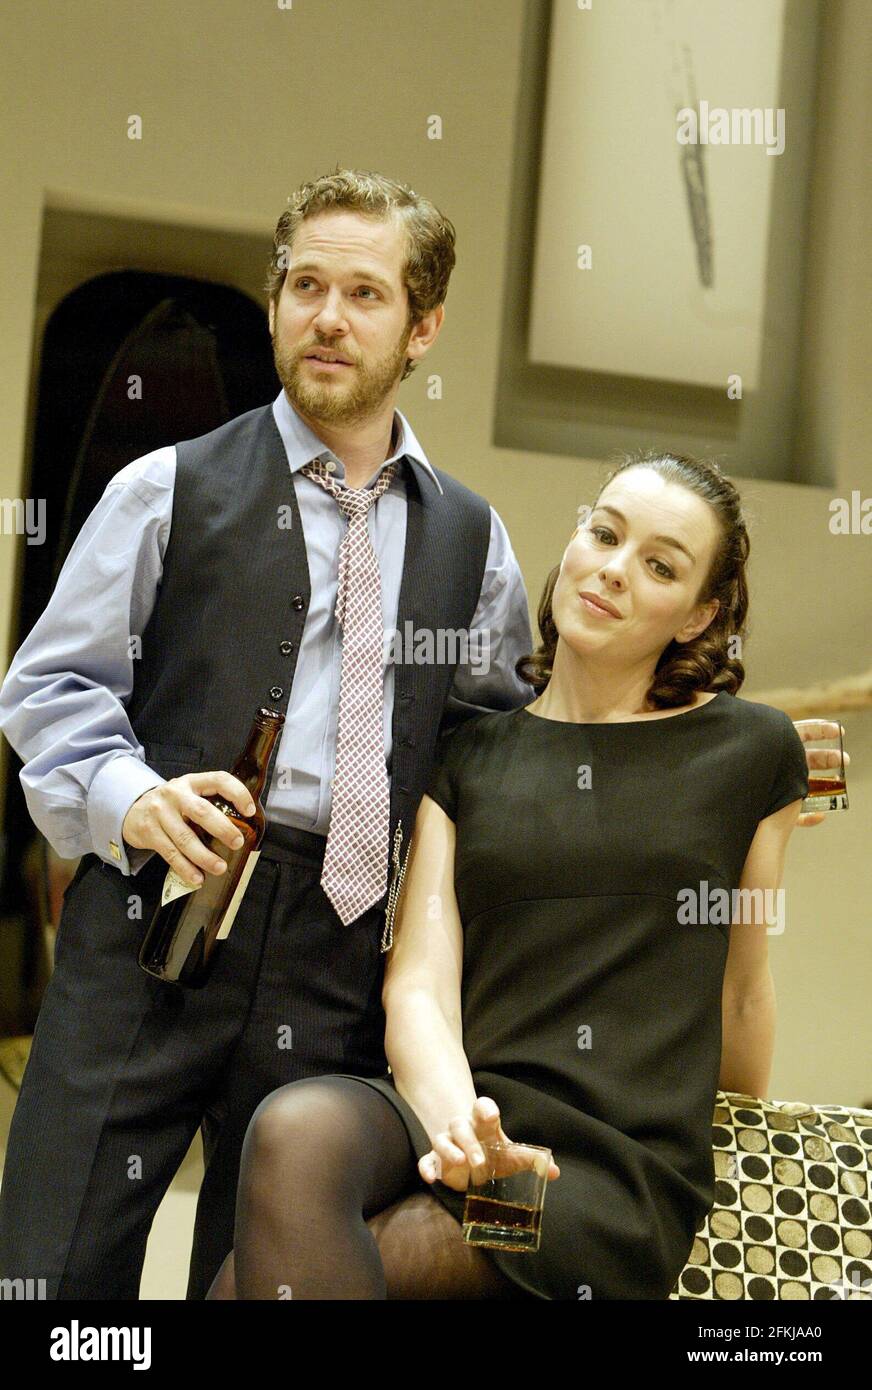 Tom Hollander (Laurie), Olivia Williams (Annie) in THE HOTEL IN AMSTERDAM by John Osborne at the Donmar Warehouse, London WC2  17/09/2003  design: Liz Ashcroft  lighting: Mick Hughes  director: Robin Lefevre Stock Photo